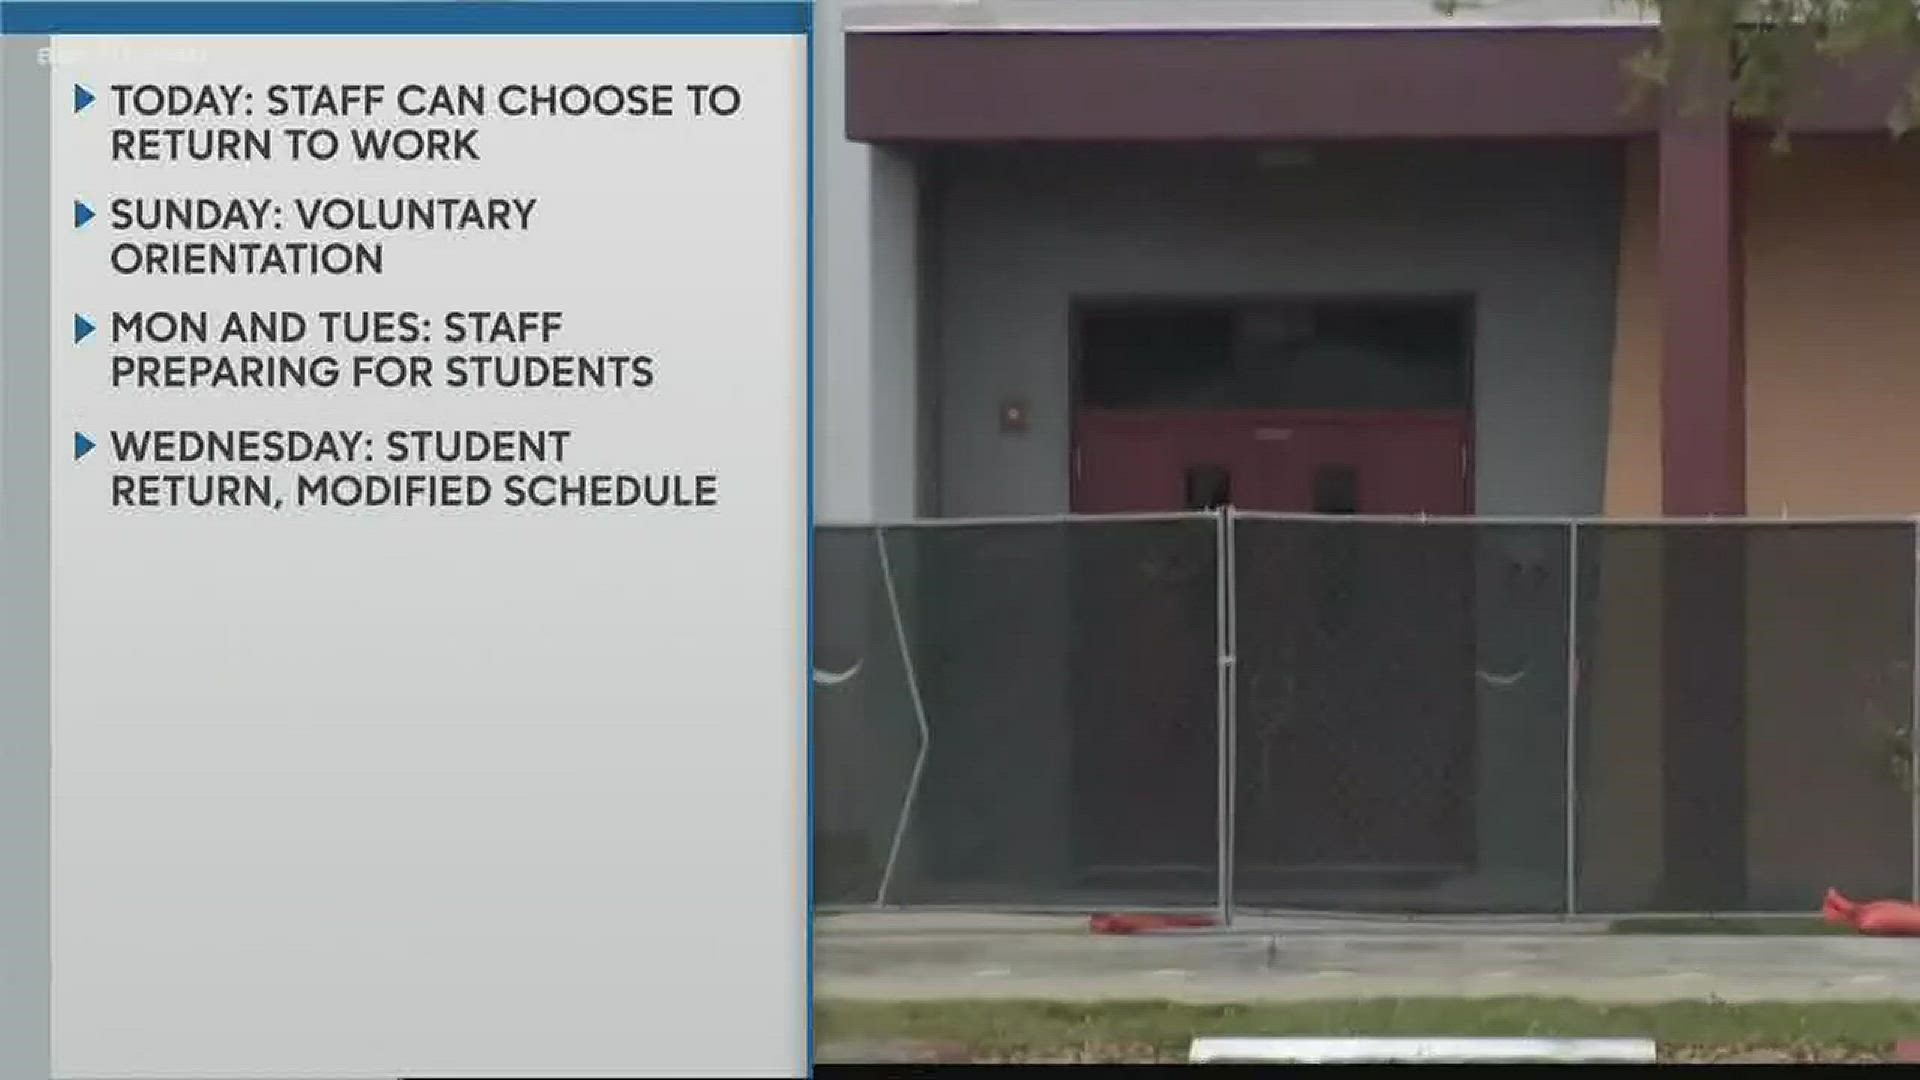 Staff members from the Florida high school where the deadly shooting took place can decide whether they're ready to return to work.